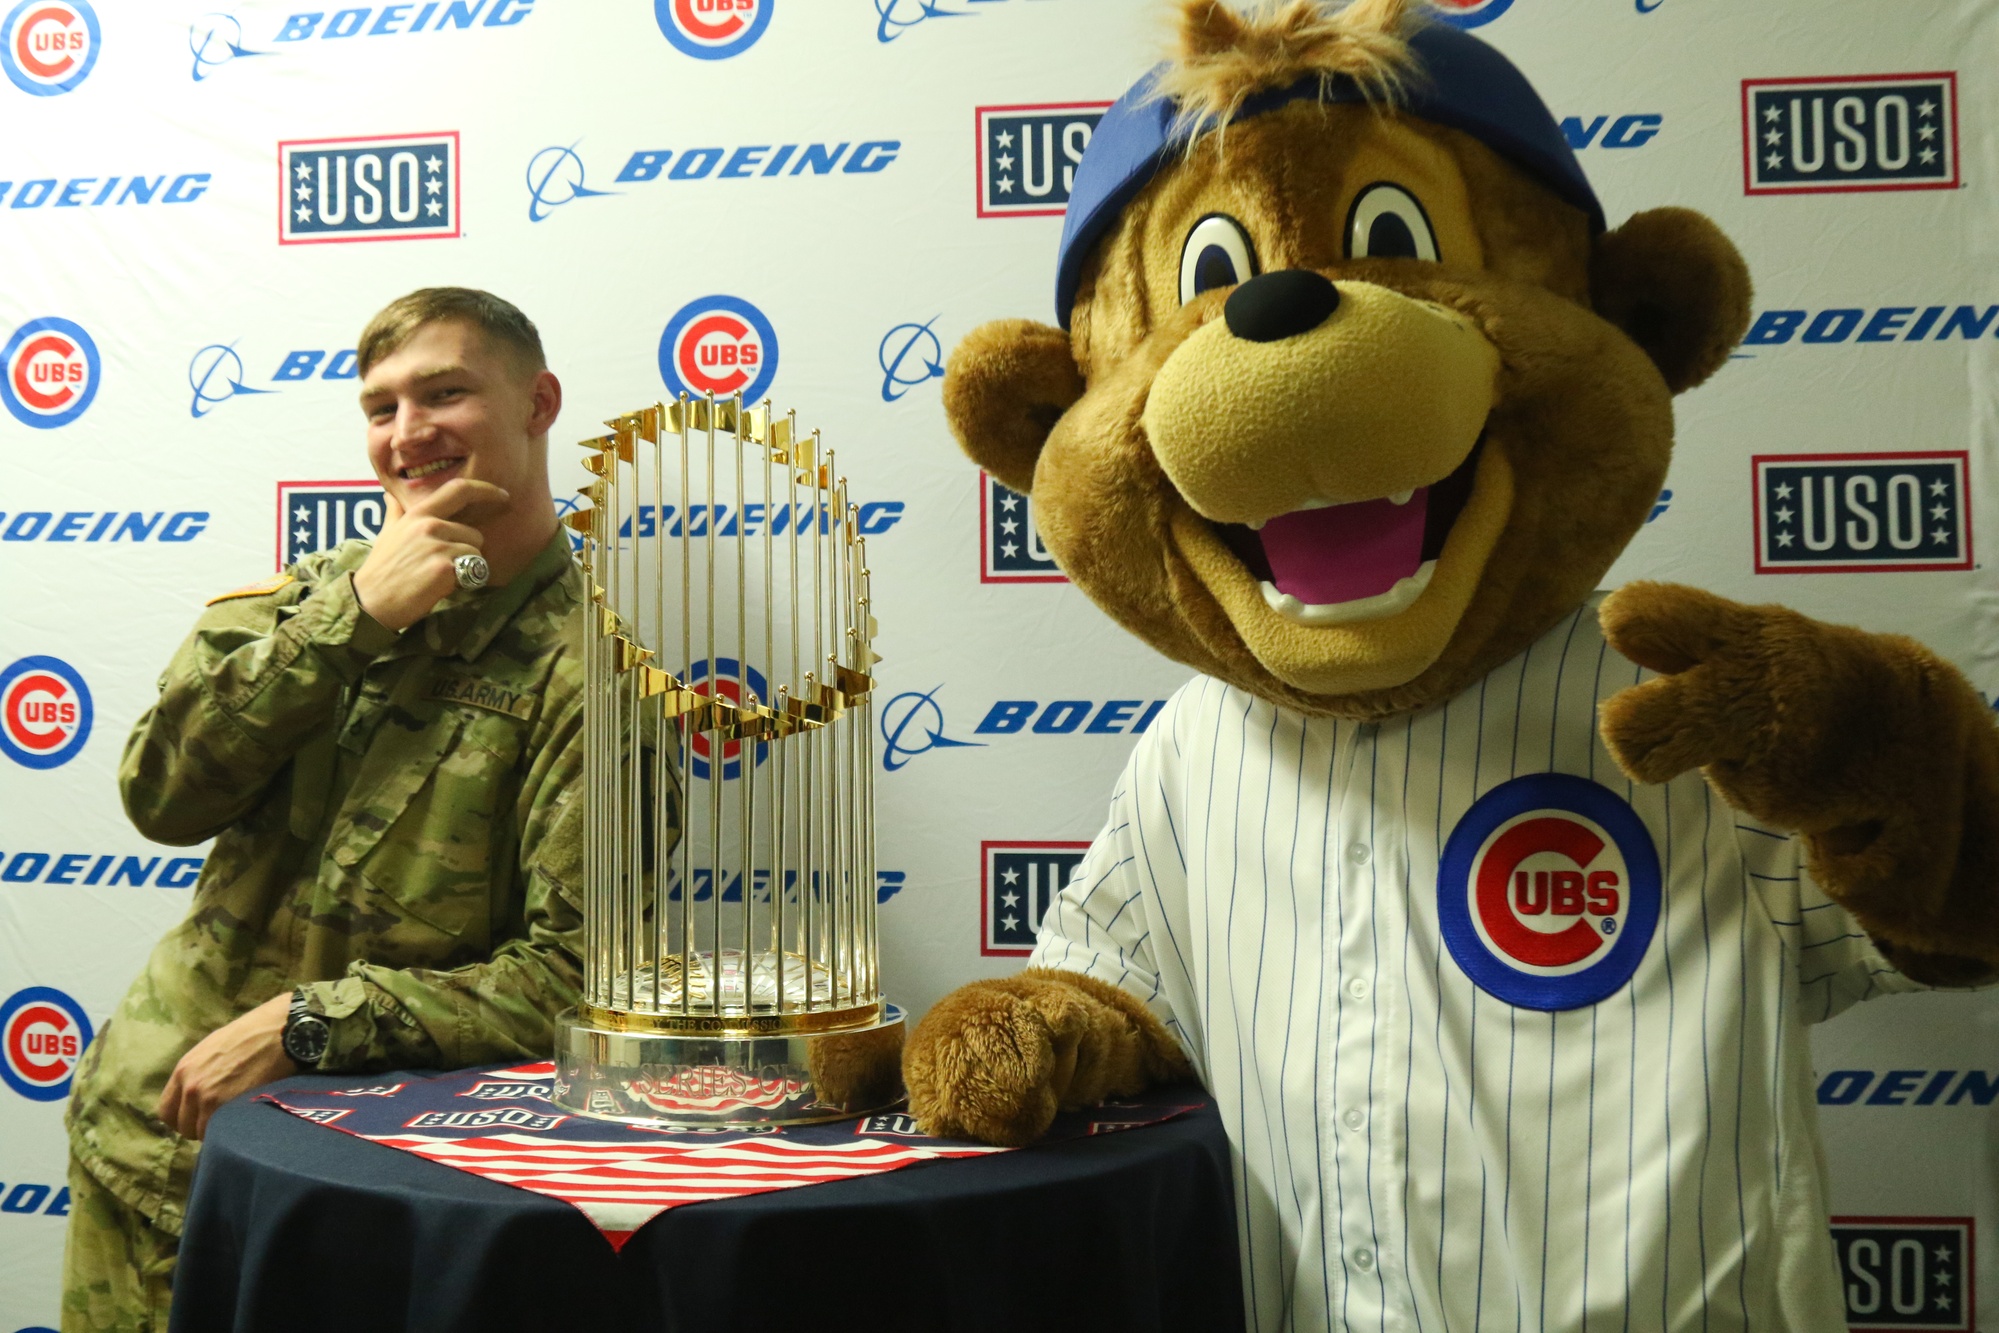 DVIDS - Images - US Soldiers meet Chicago Cubs mascot at Camp